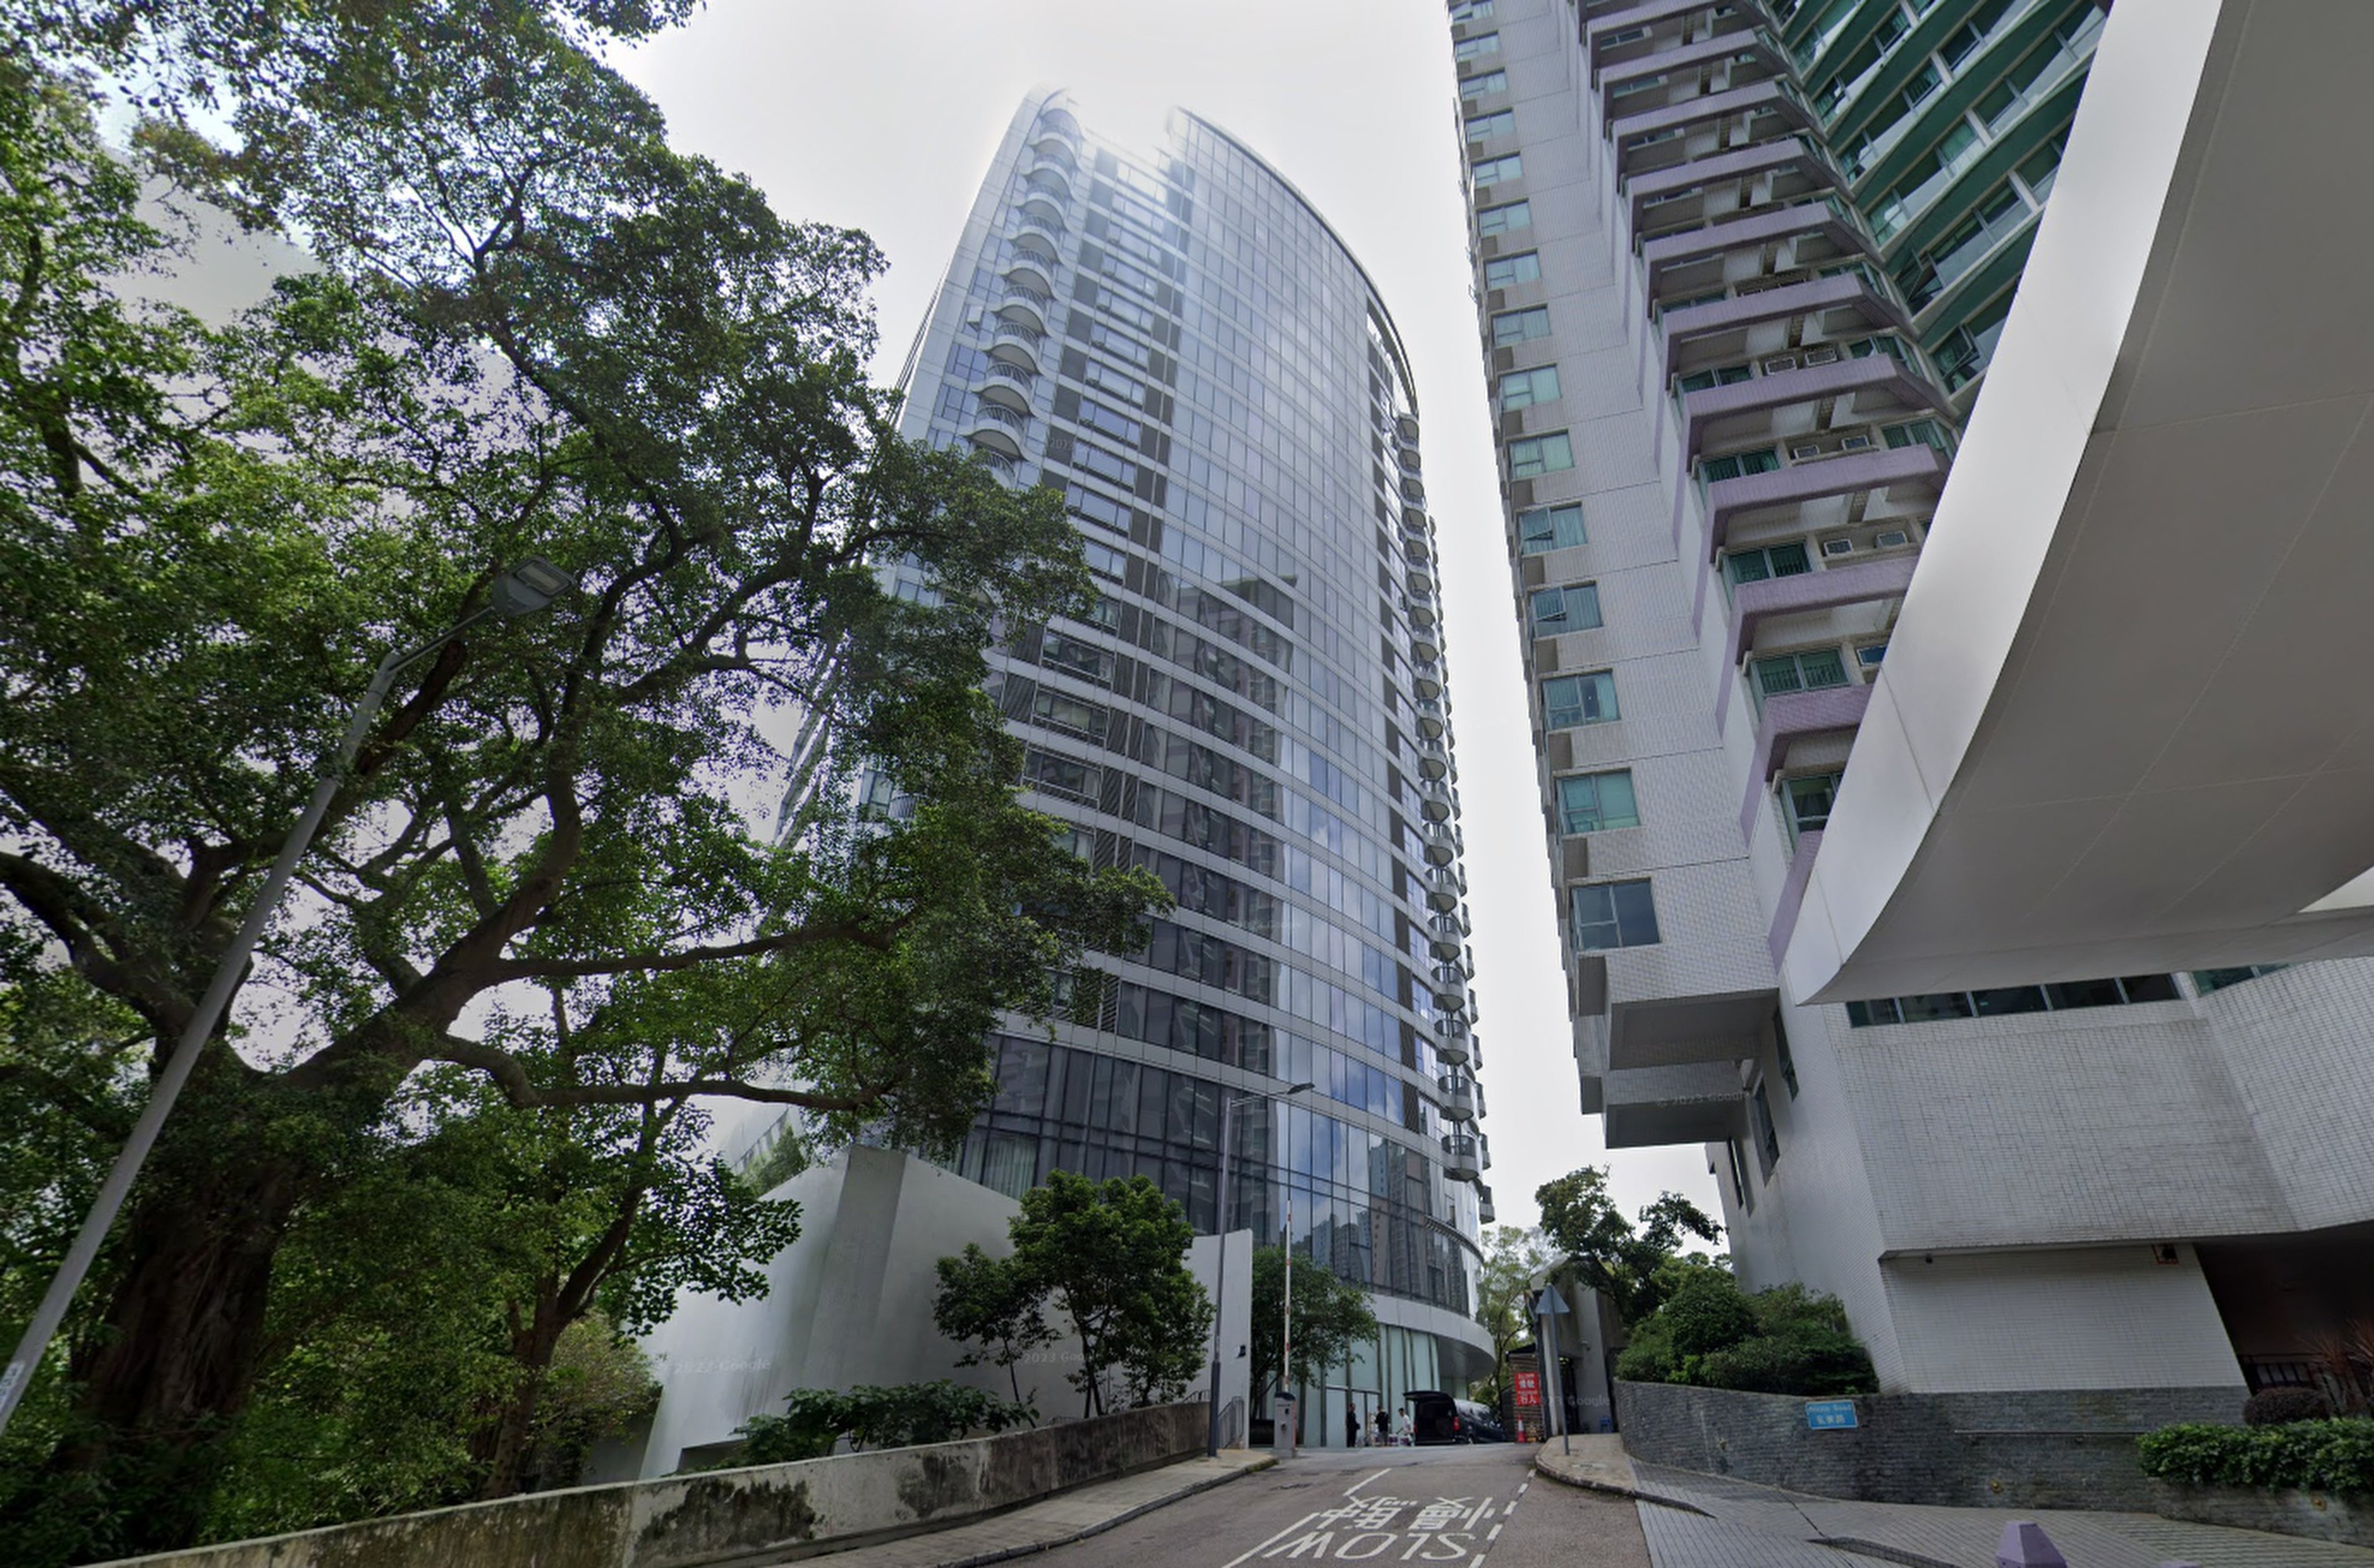 Mount Parker Residences in Quarry Bay was among the 10 properties in the case. Photo: Handout